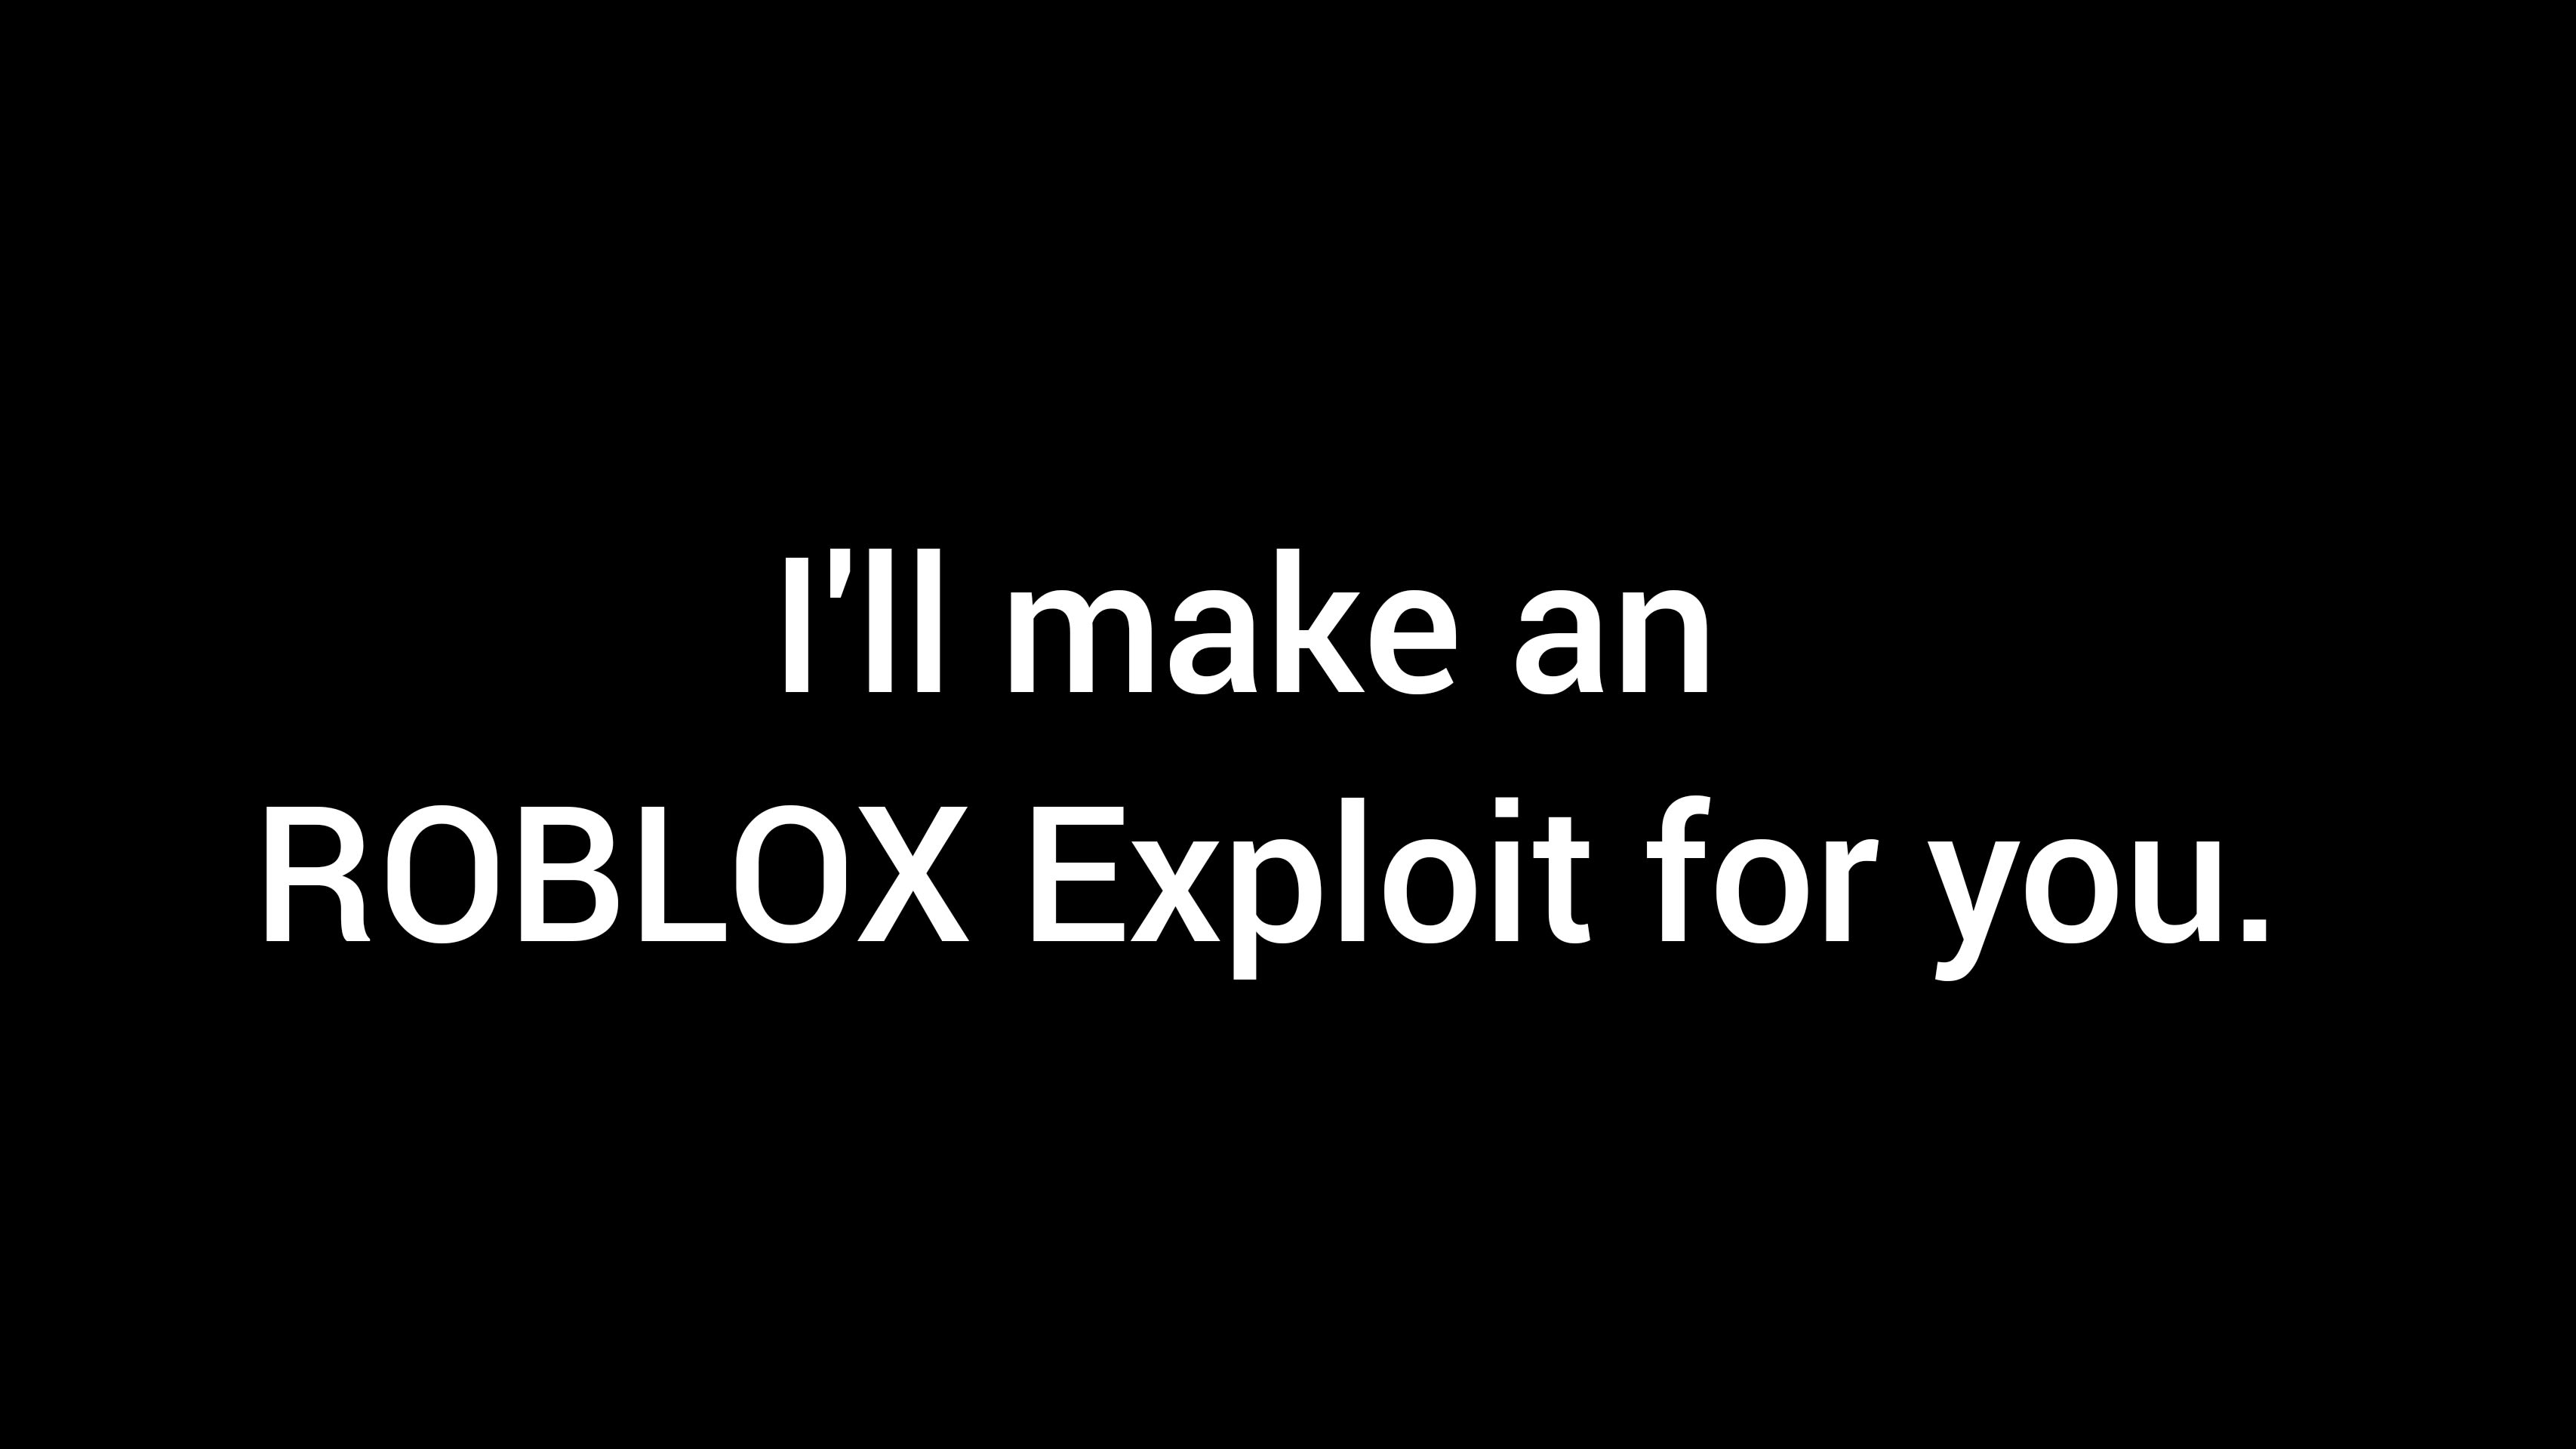 Create Easyexploits Powered Exploit For You By Piatex738 Fiverr - roblox exploit icon